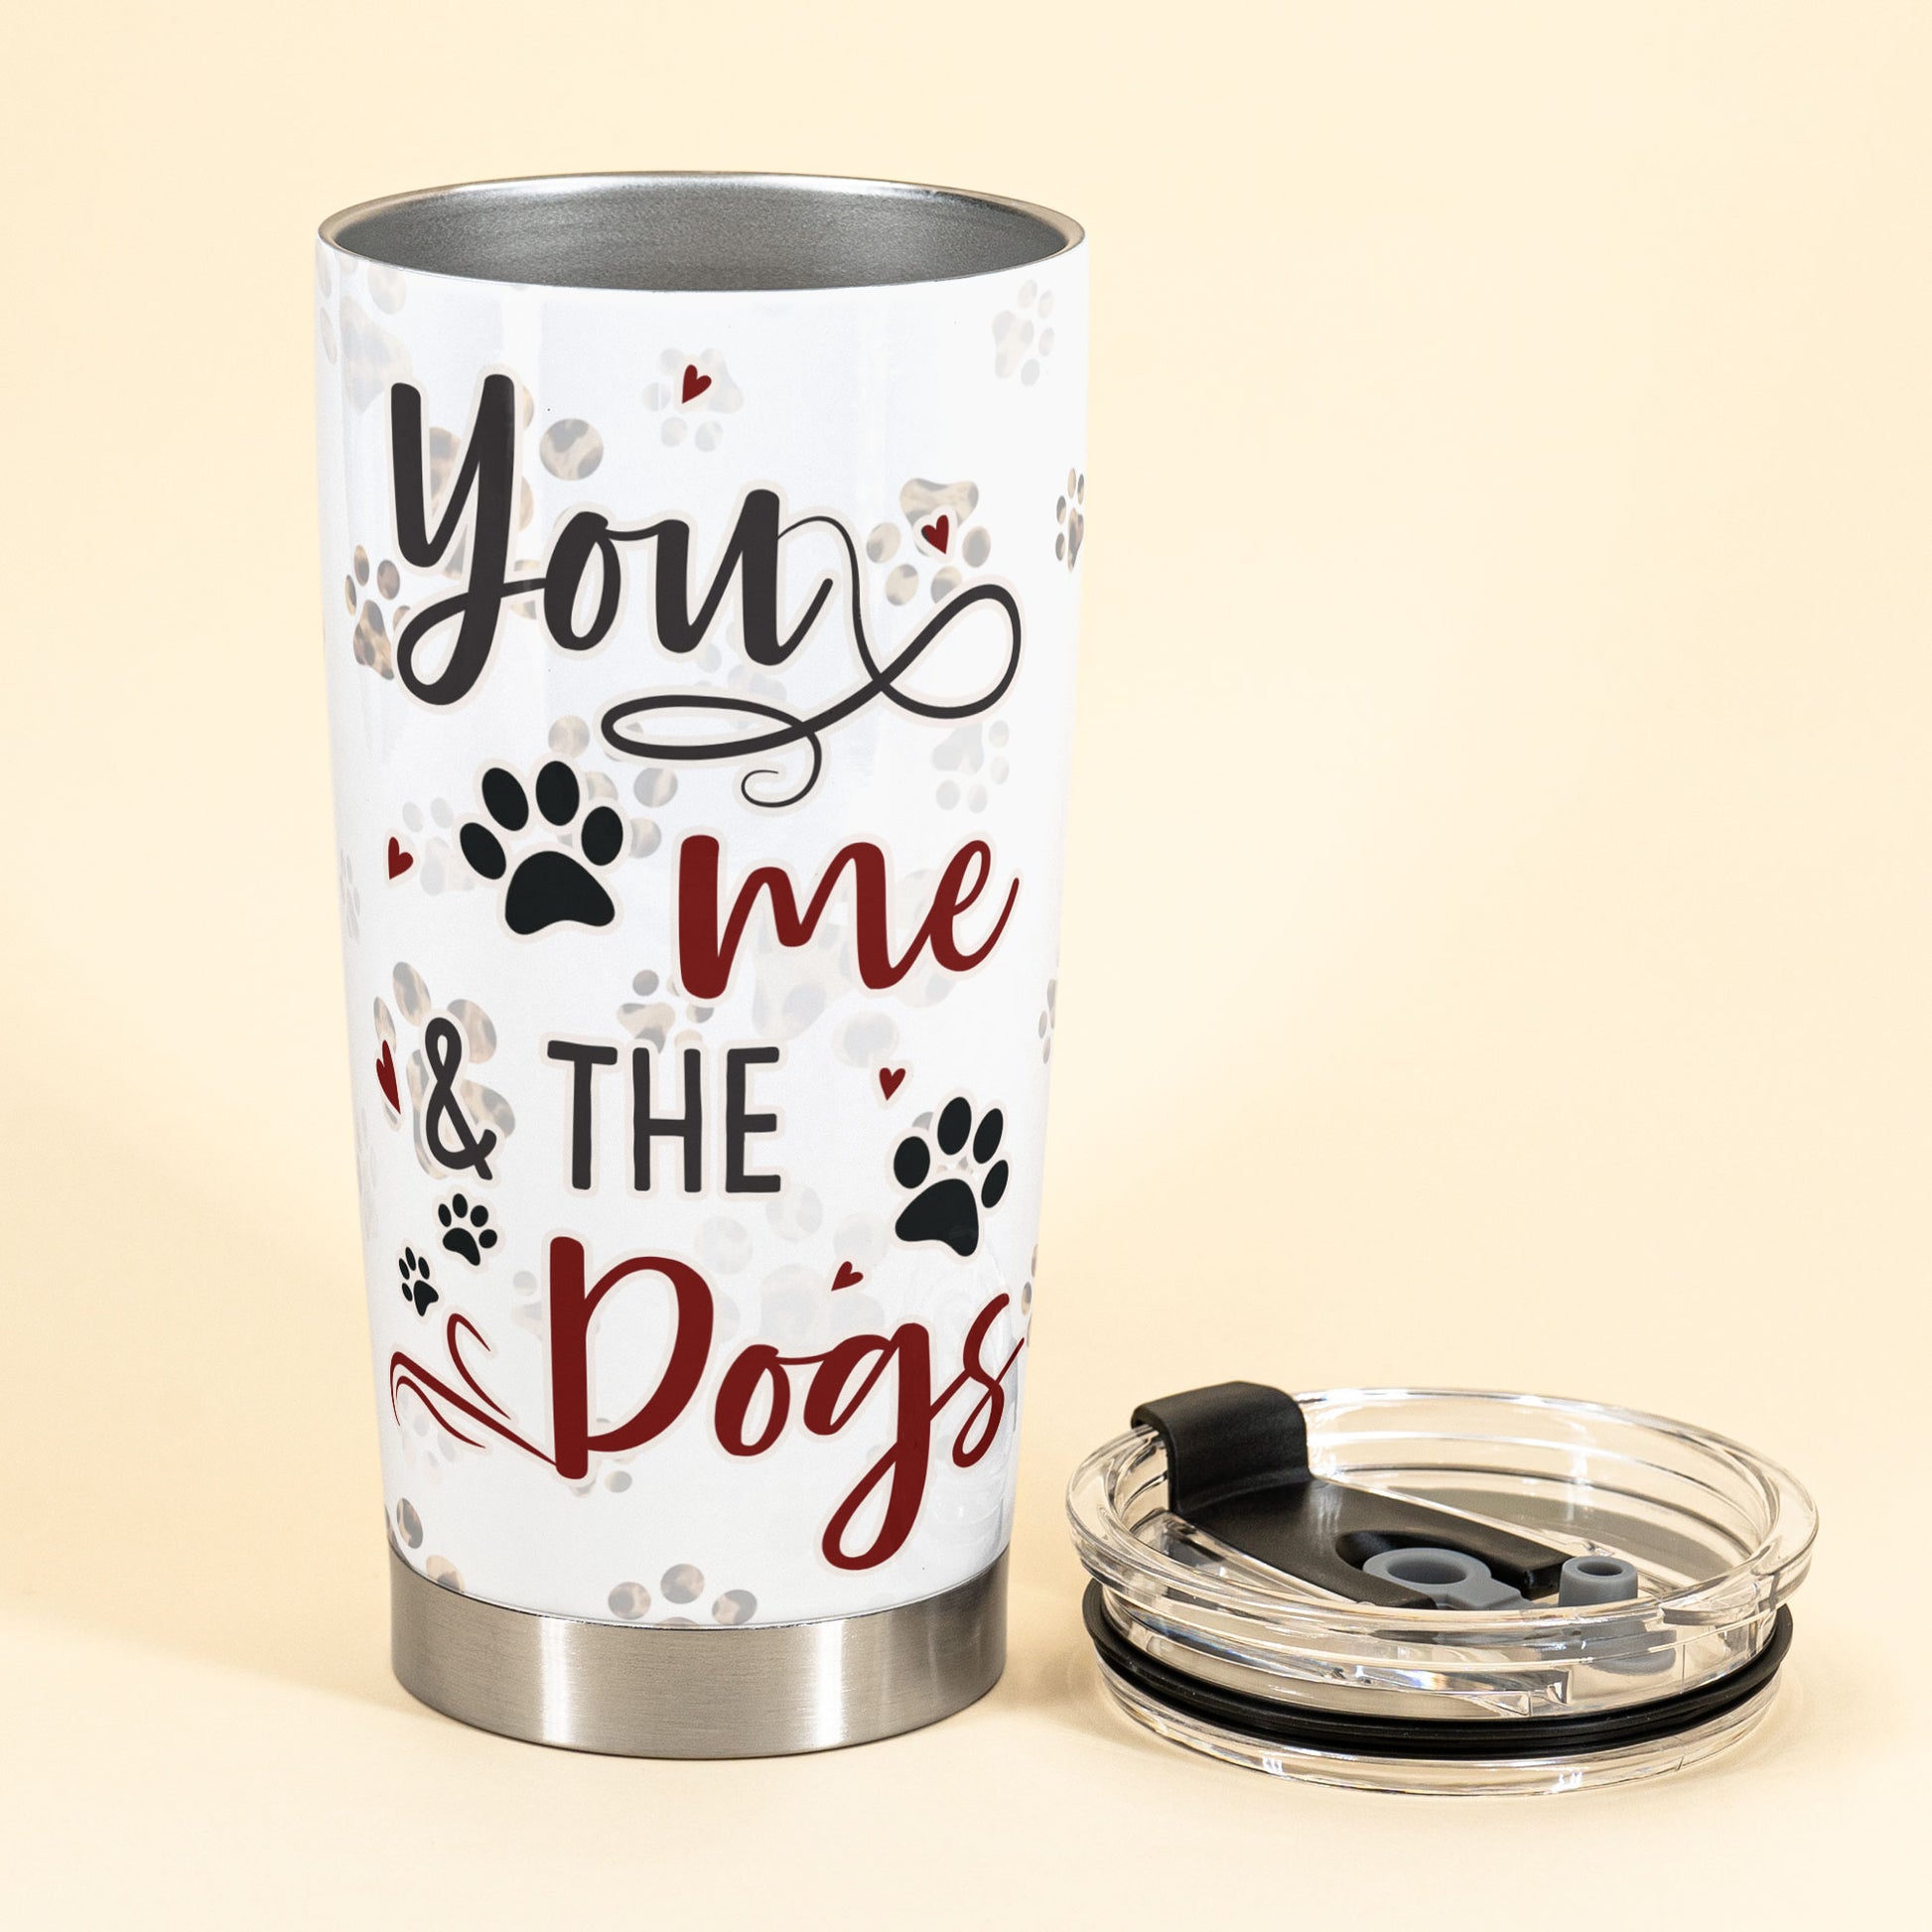 You Me The Dogs - Personalized Tumbler Cup - Birthday Anniversary Gift For Dog Lovers, Wife, Husband, Couple